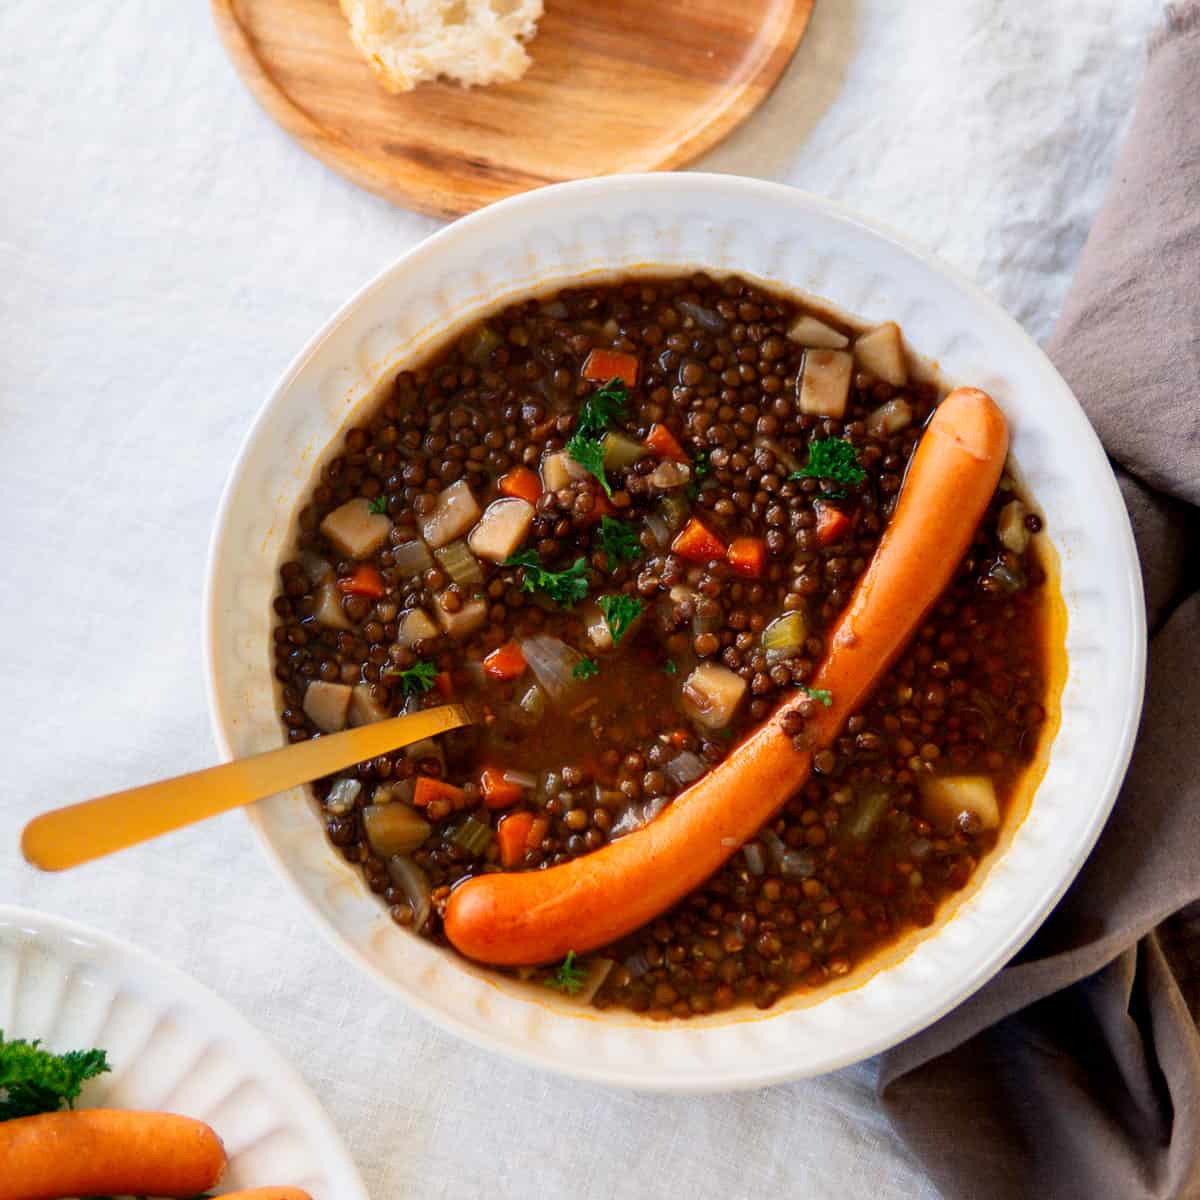 German lentil soup in a bowl with a hot dog